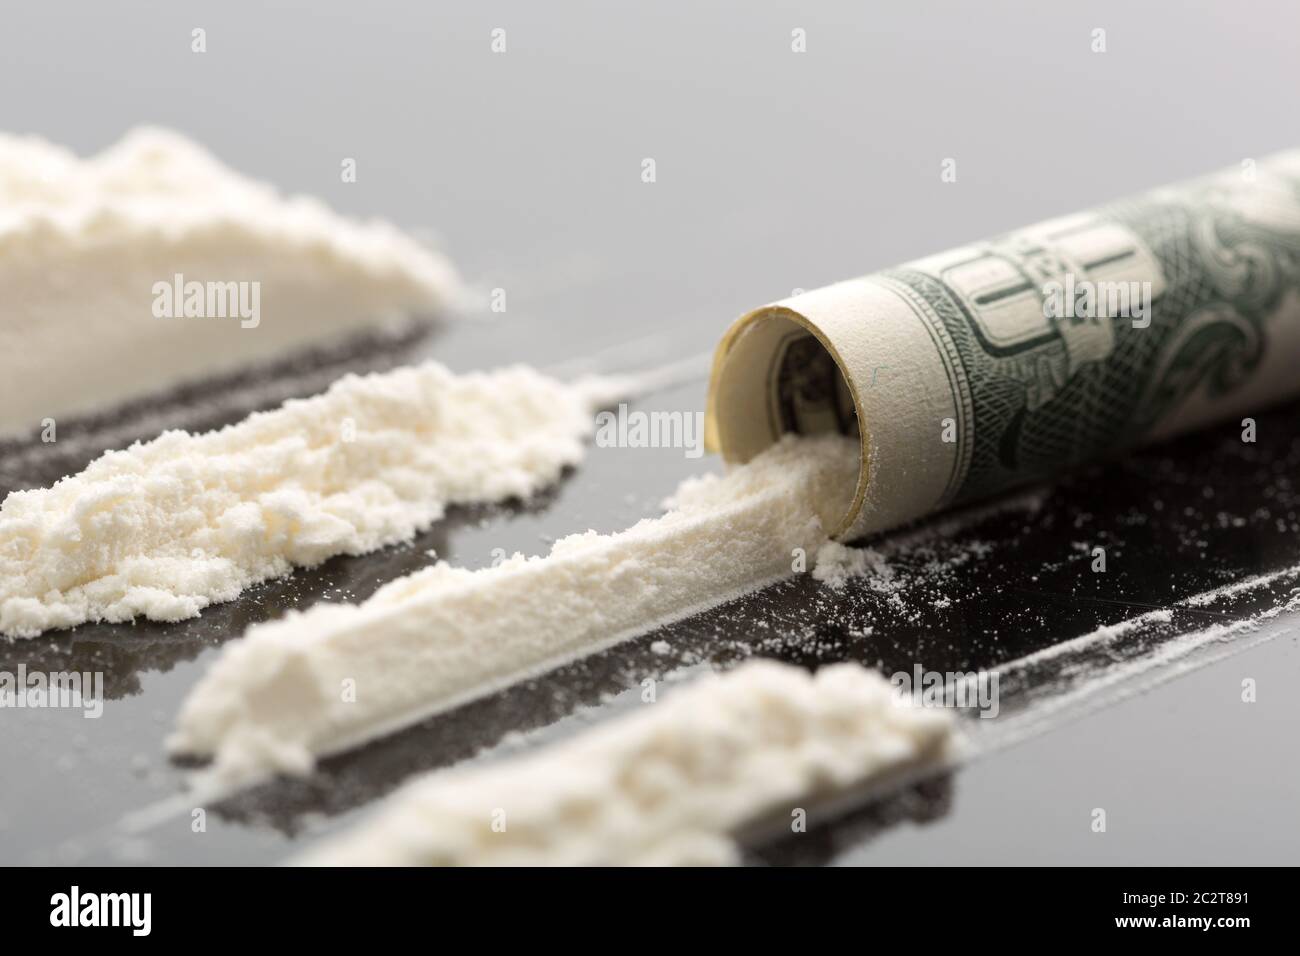 Cocaine lines and 10 dollars note on grey background Stock Photo